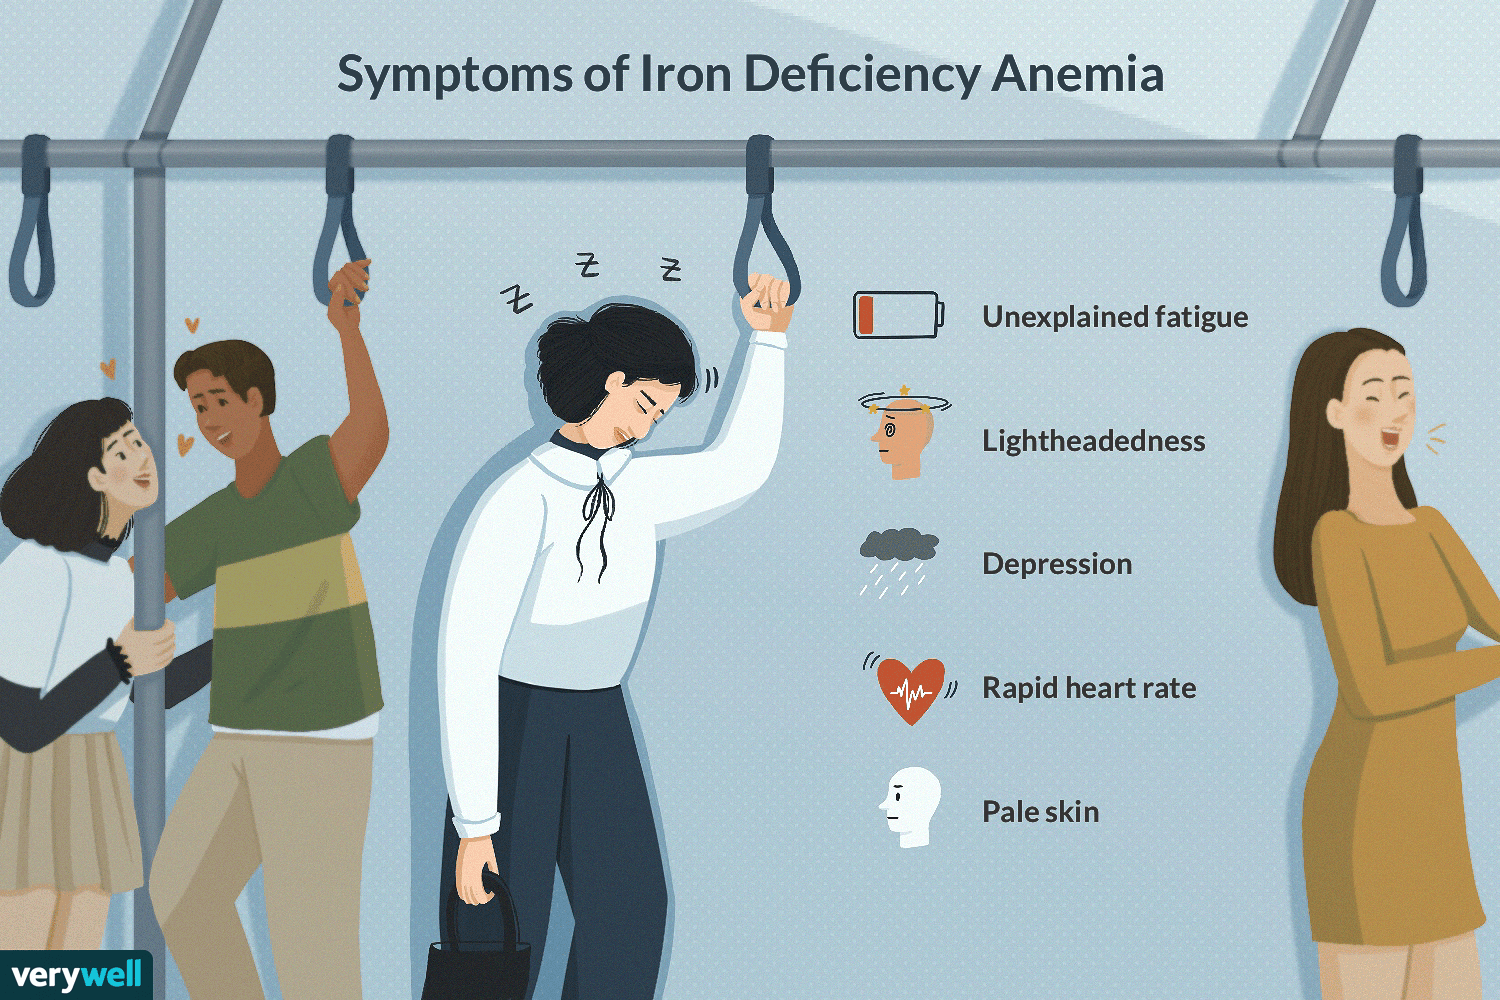 Iron Deficiency Anemia: Symptoms, Causes, Diagnosis, and Treatment